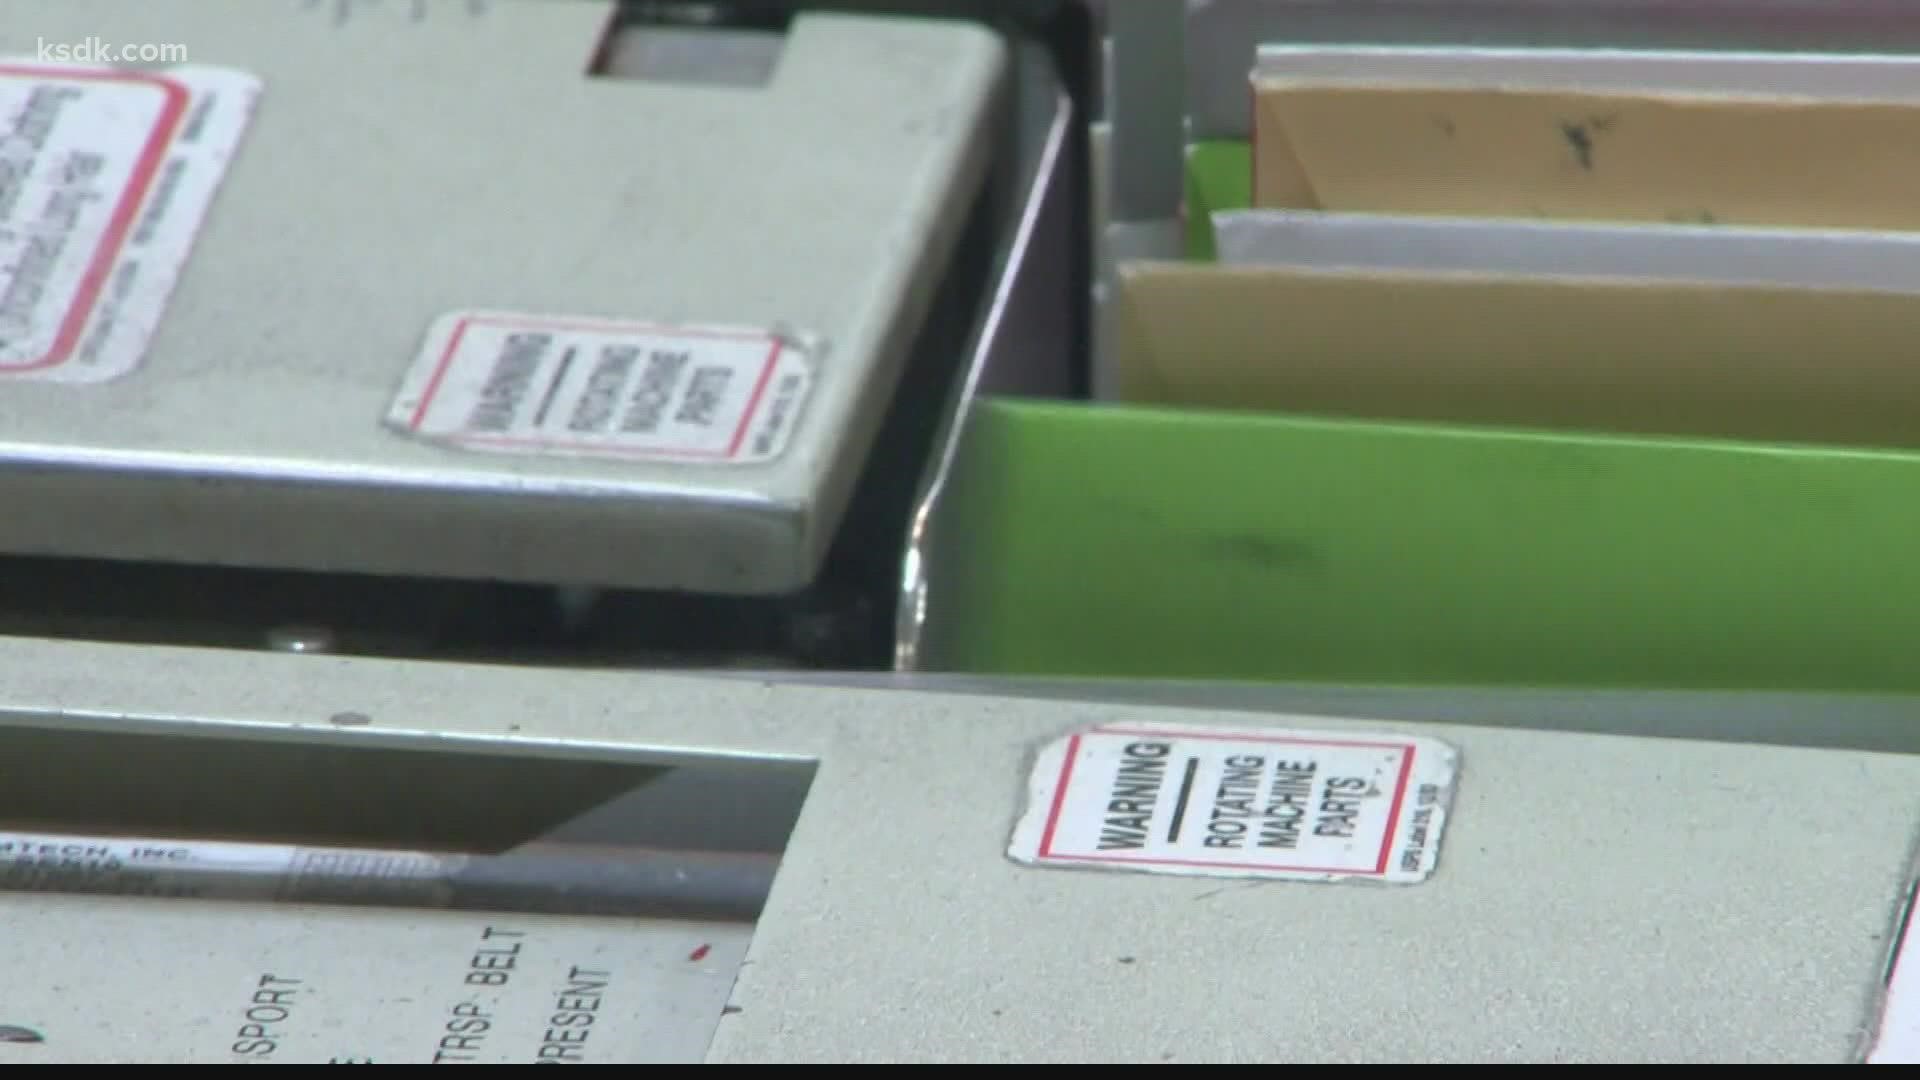 The county was a few weeks behind in mailing residents their bills because of problems with contracting companies for the printing and mailing process.